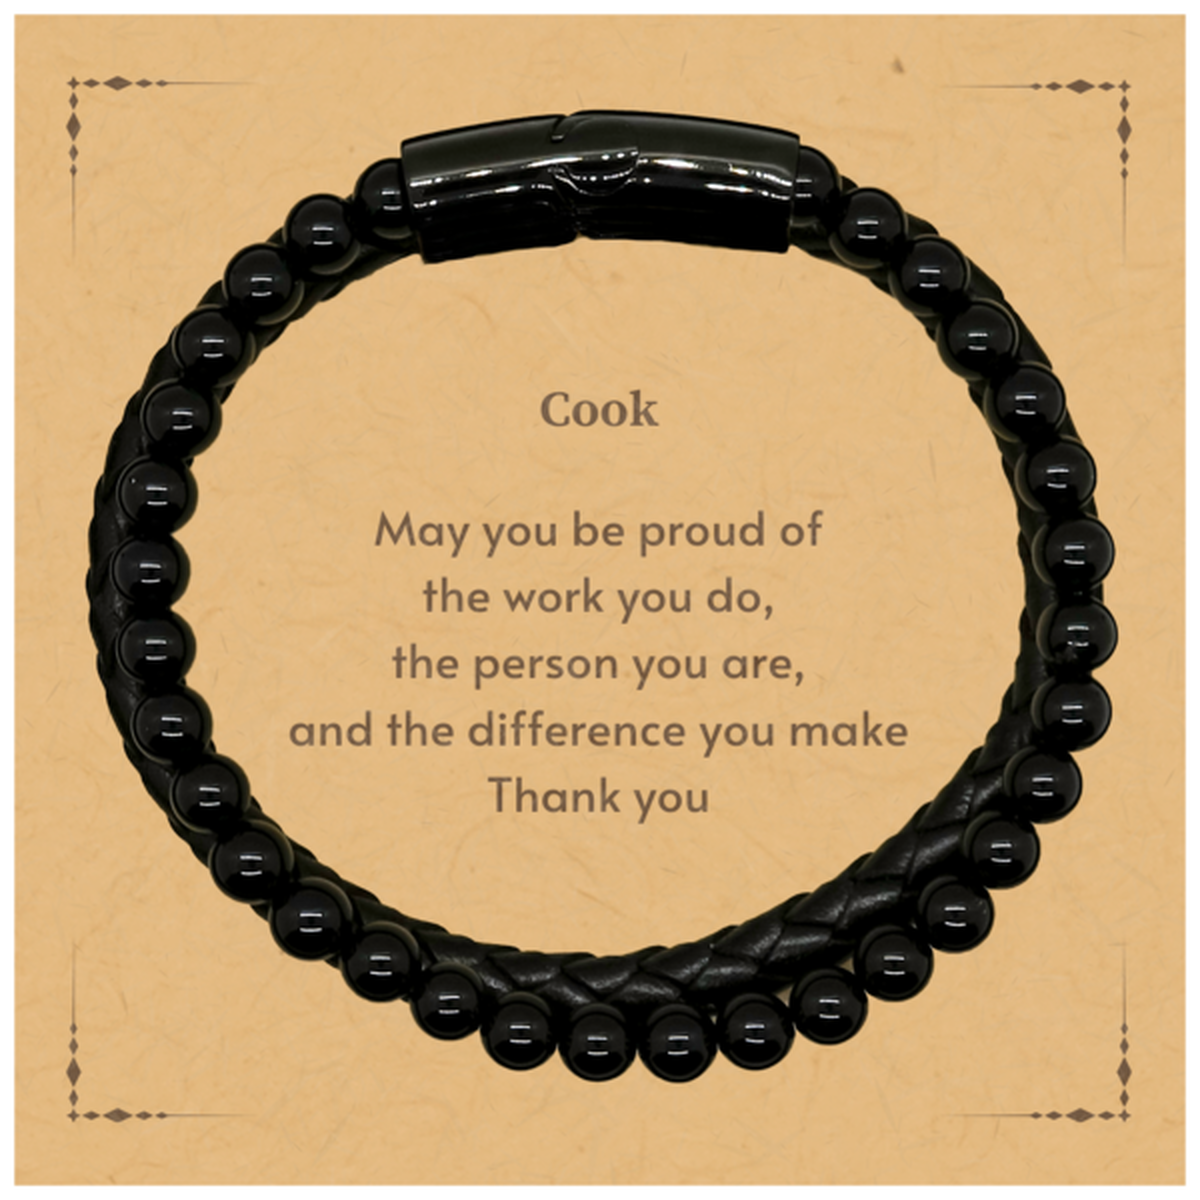 Heartwarming Stone Leather Bracelets Retirement Coworkers Gifts for Cook, Cook May You be proud of the work you do, the person you are Gifts for Boss Men Women Friends